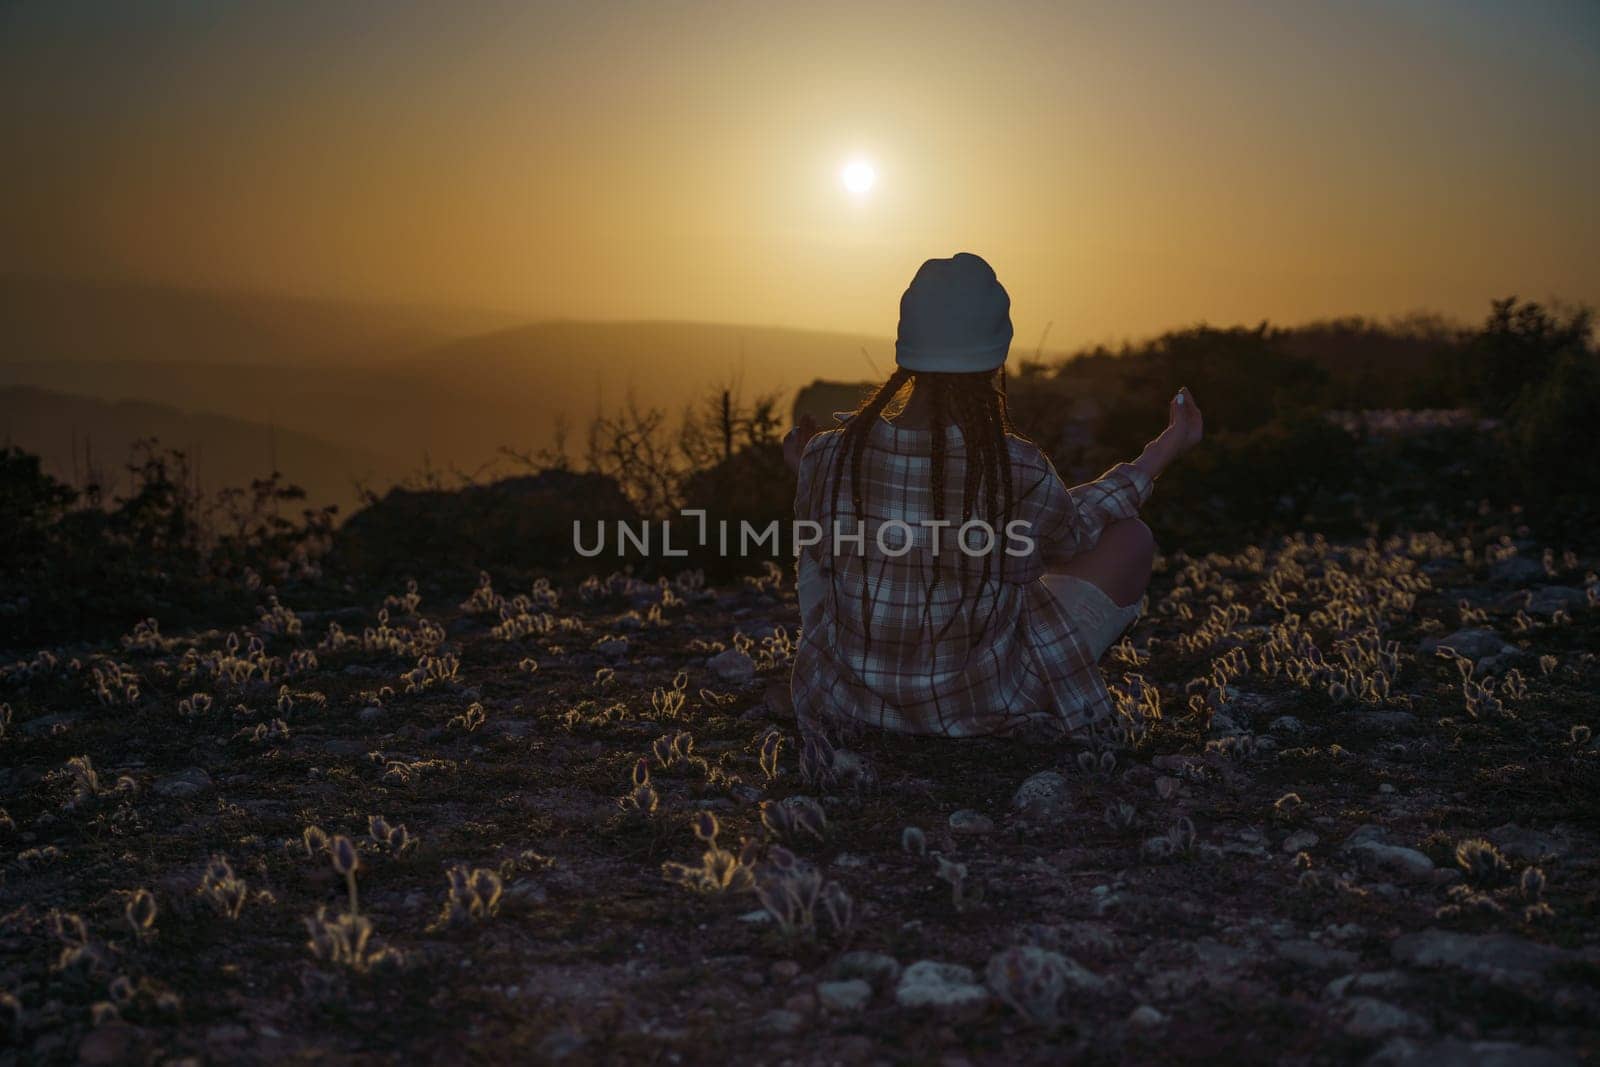 Woman tourist on top of sunrise mountain. The girl salutes the sun, wearing a jacket, white hat and white jeans. Conceptual design